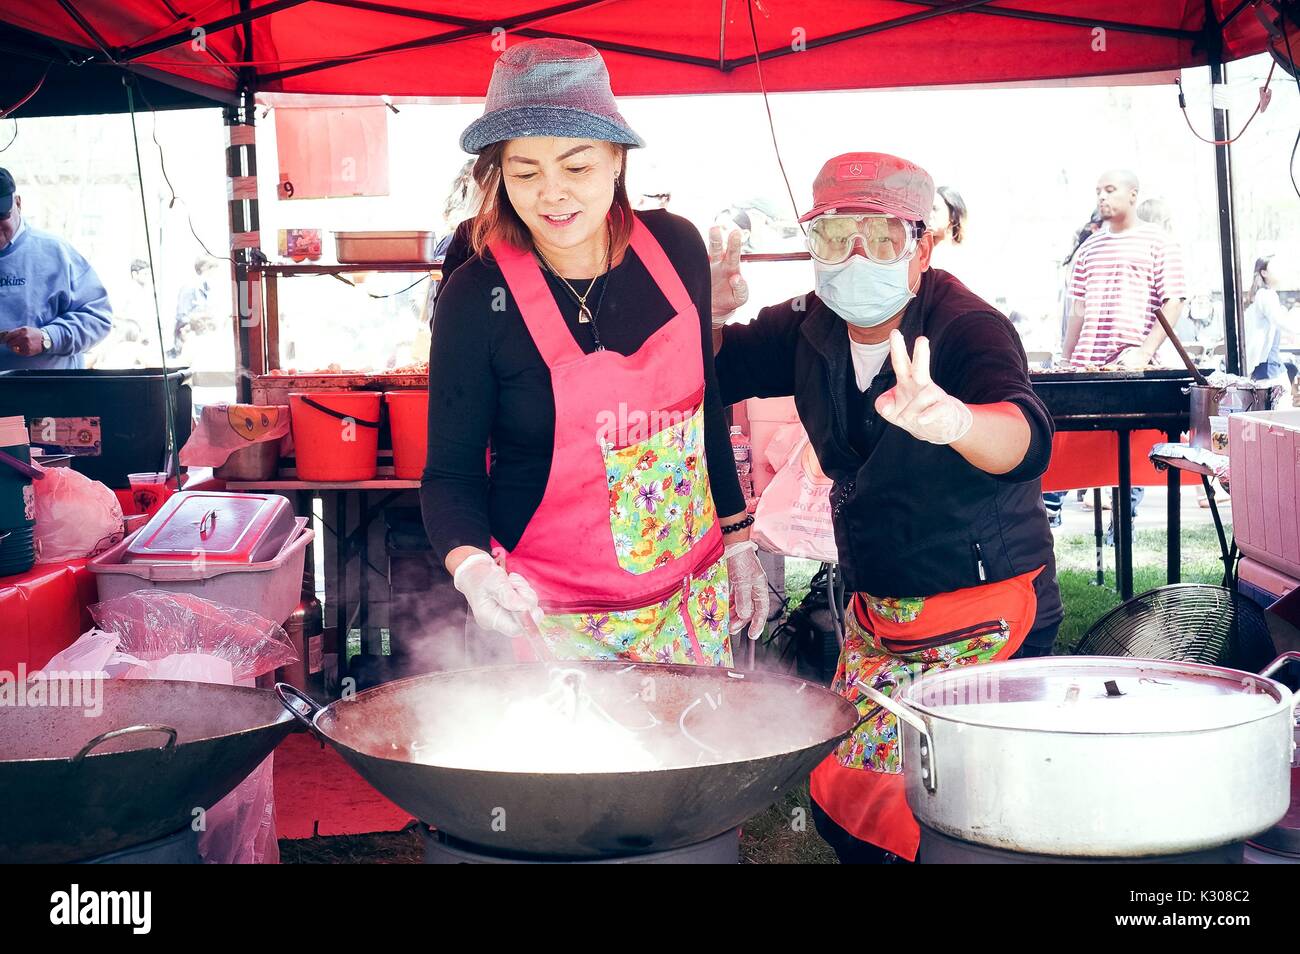 A woman wearing hat and apron stirs noodles in a giant wok, while a man beside her throws up peace signs with gloved hands, behind a food booth at Spring Fair, a student-run spring carnival at Johns Hopkins University, Baltimore, Maryland, April, 2016. Courtesy Eric Chen. Stock Photo